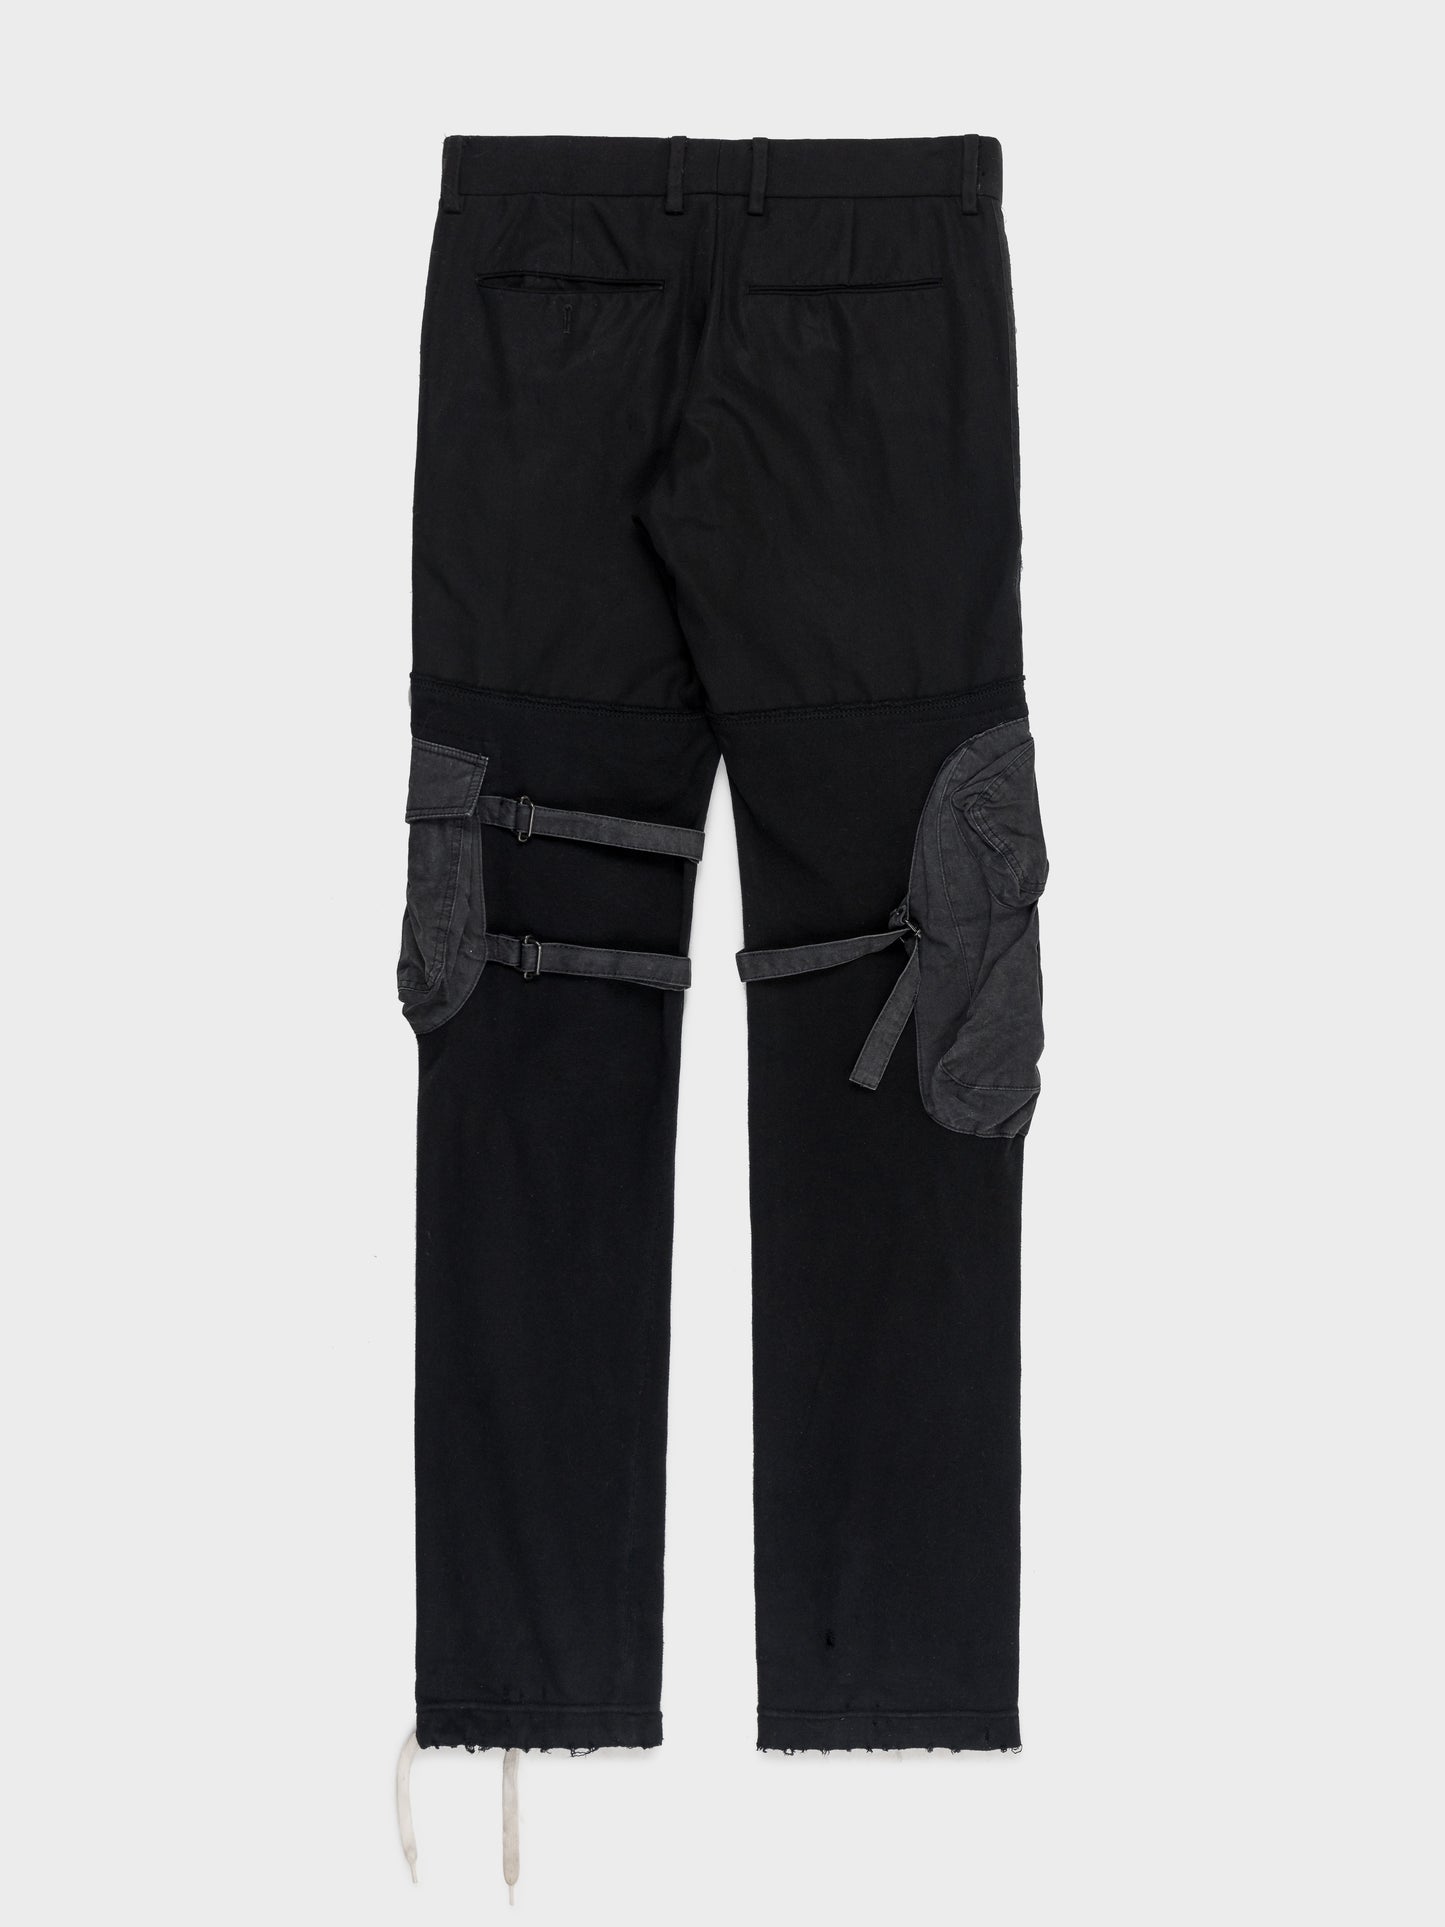 'The High Streets' Hybrid Cargo Pants